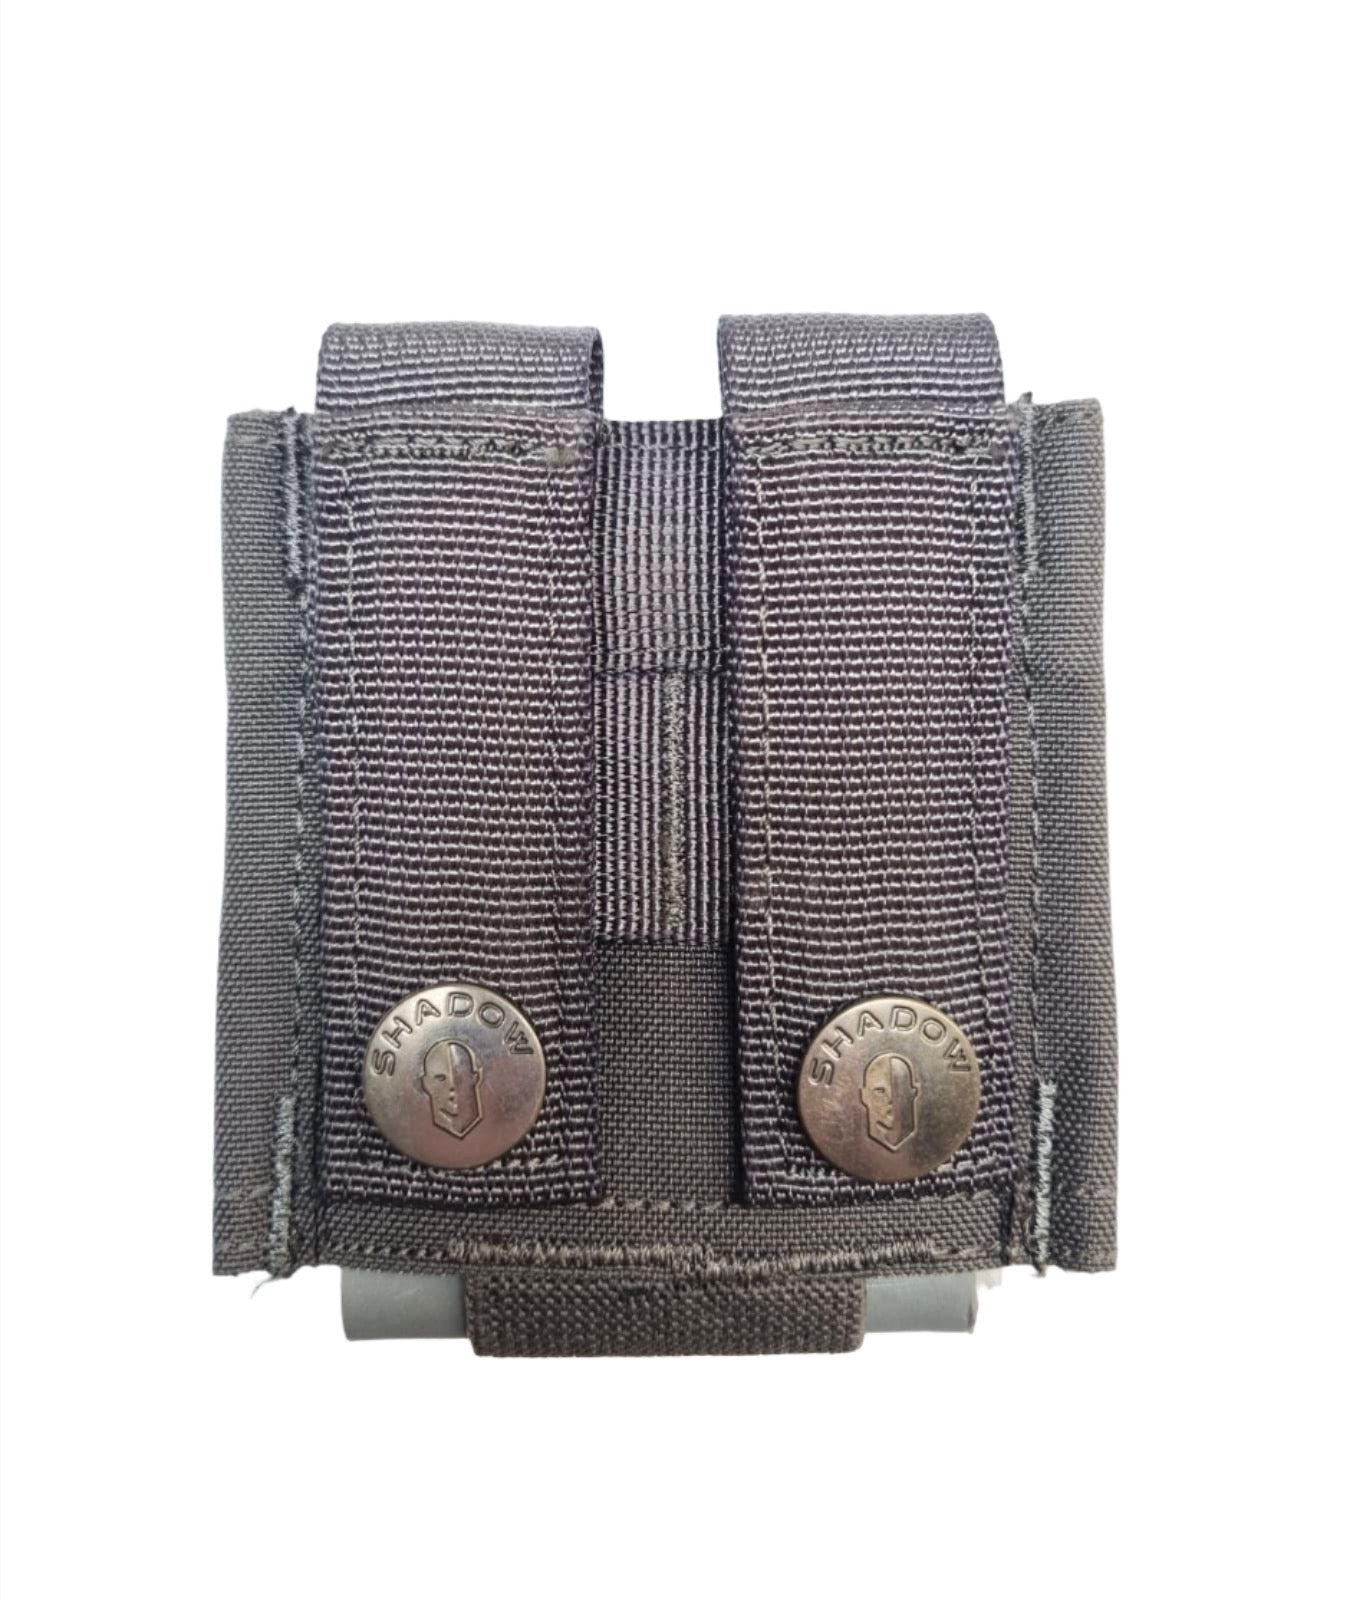 SHE-23031 GRIPTAC SINGLE M4/M16 MAG POUCH WOLF GREY